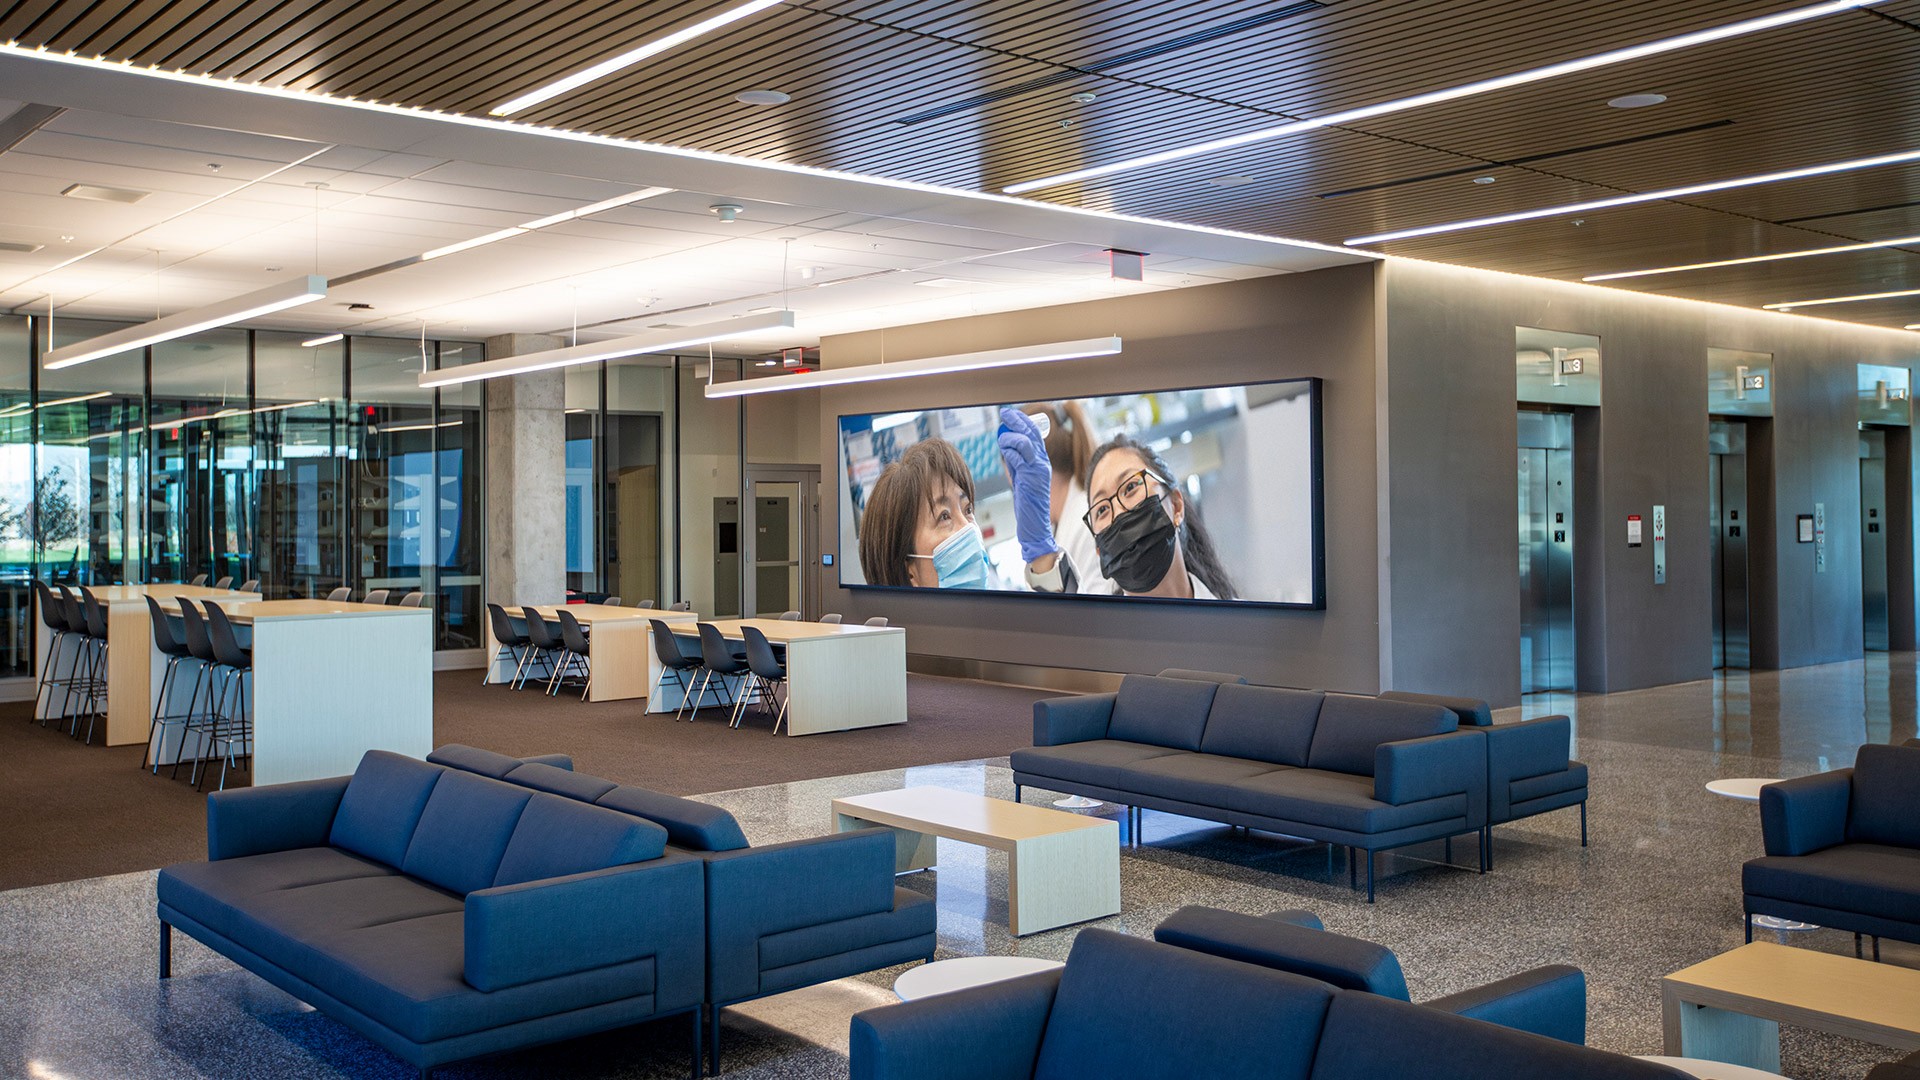 Research Center lobby with giant screen